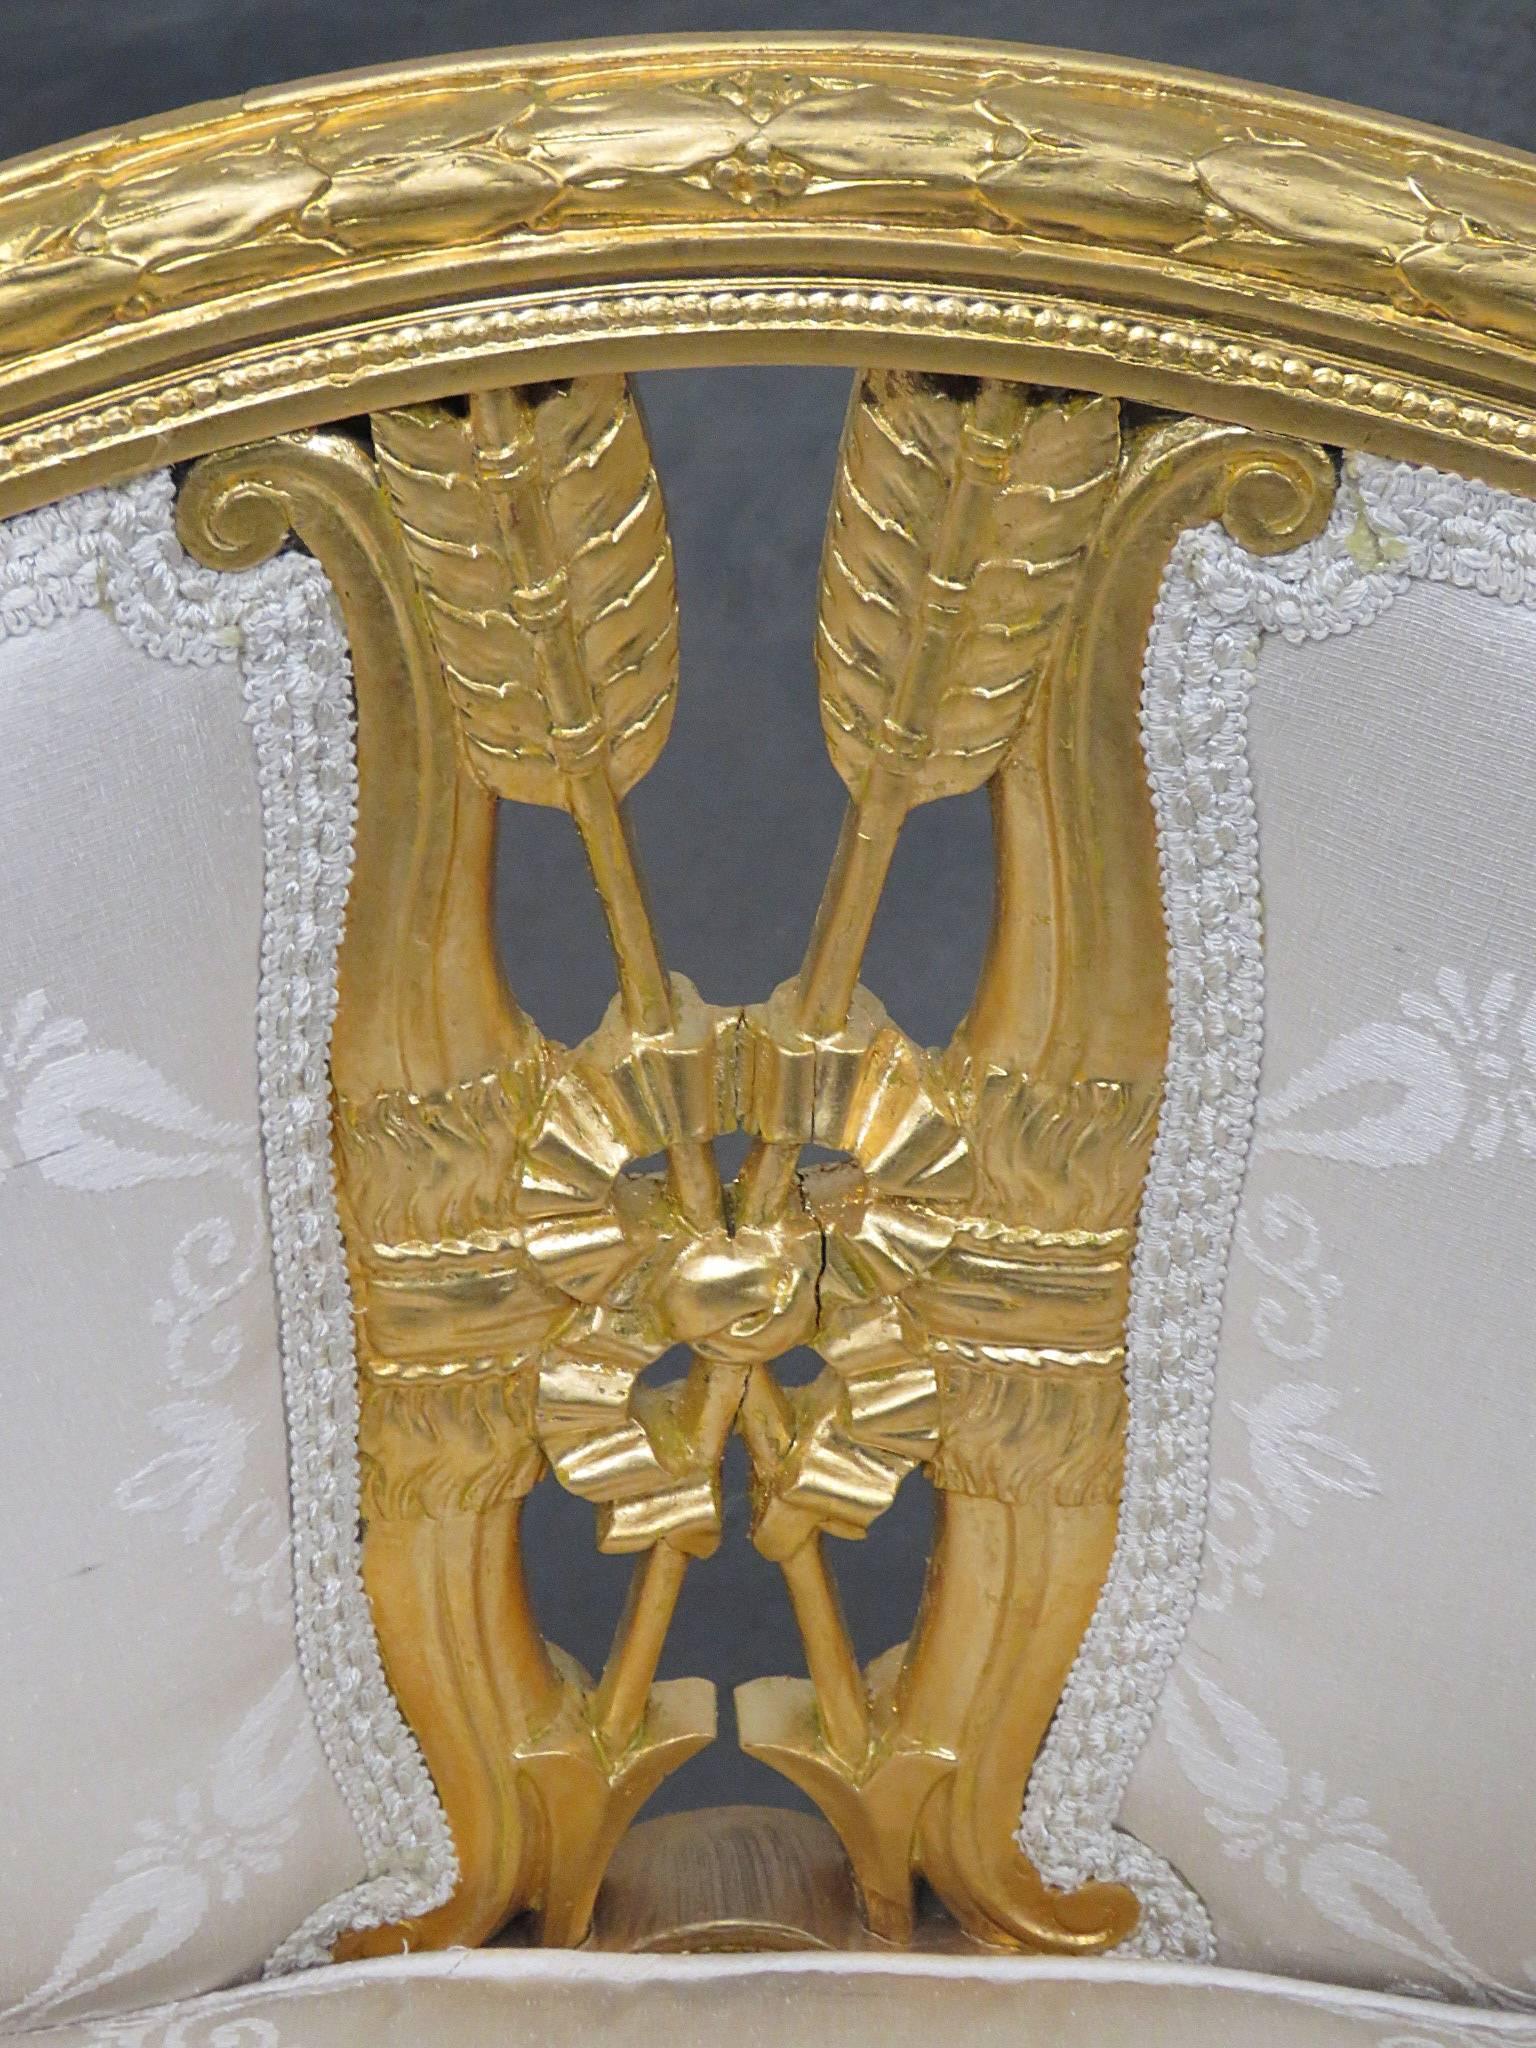 Pair of gold gilt marquis. Measures: 20